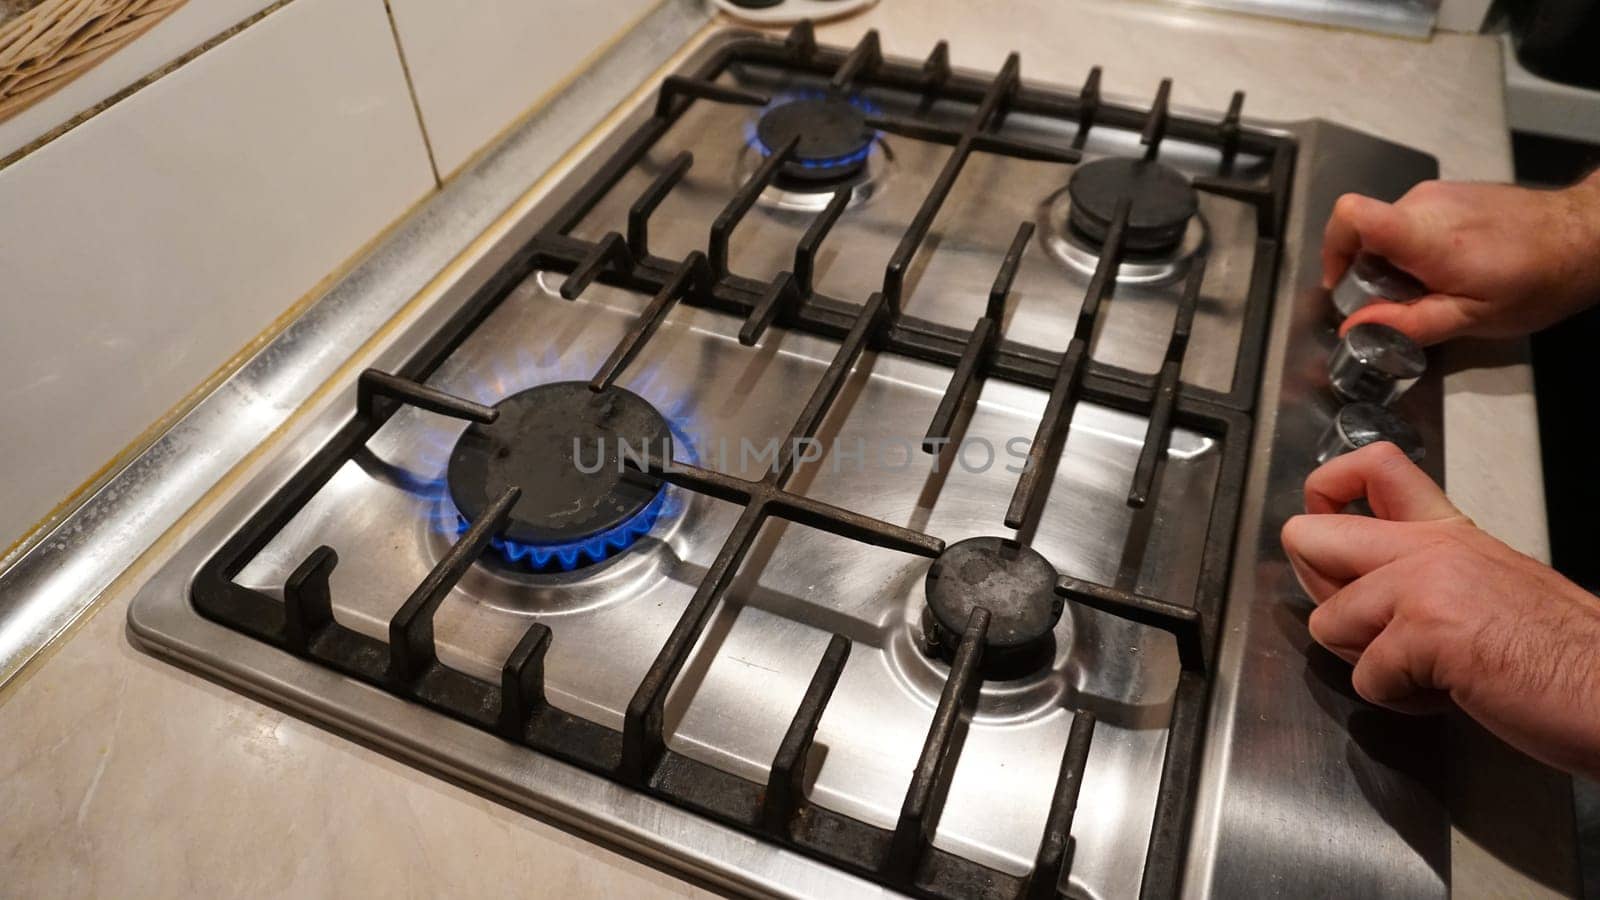 Turns off or turns on the gas on the stove. Blue flame of fire on black burners. The man's hands turn off or turn on the gas. Black grilles on a steel plate. White tiles on the walls. Cold winter